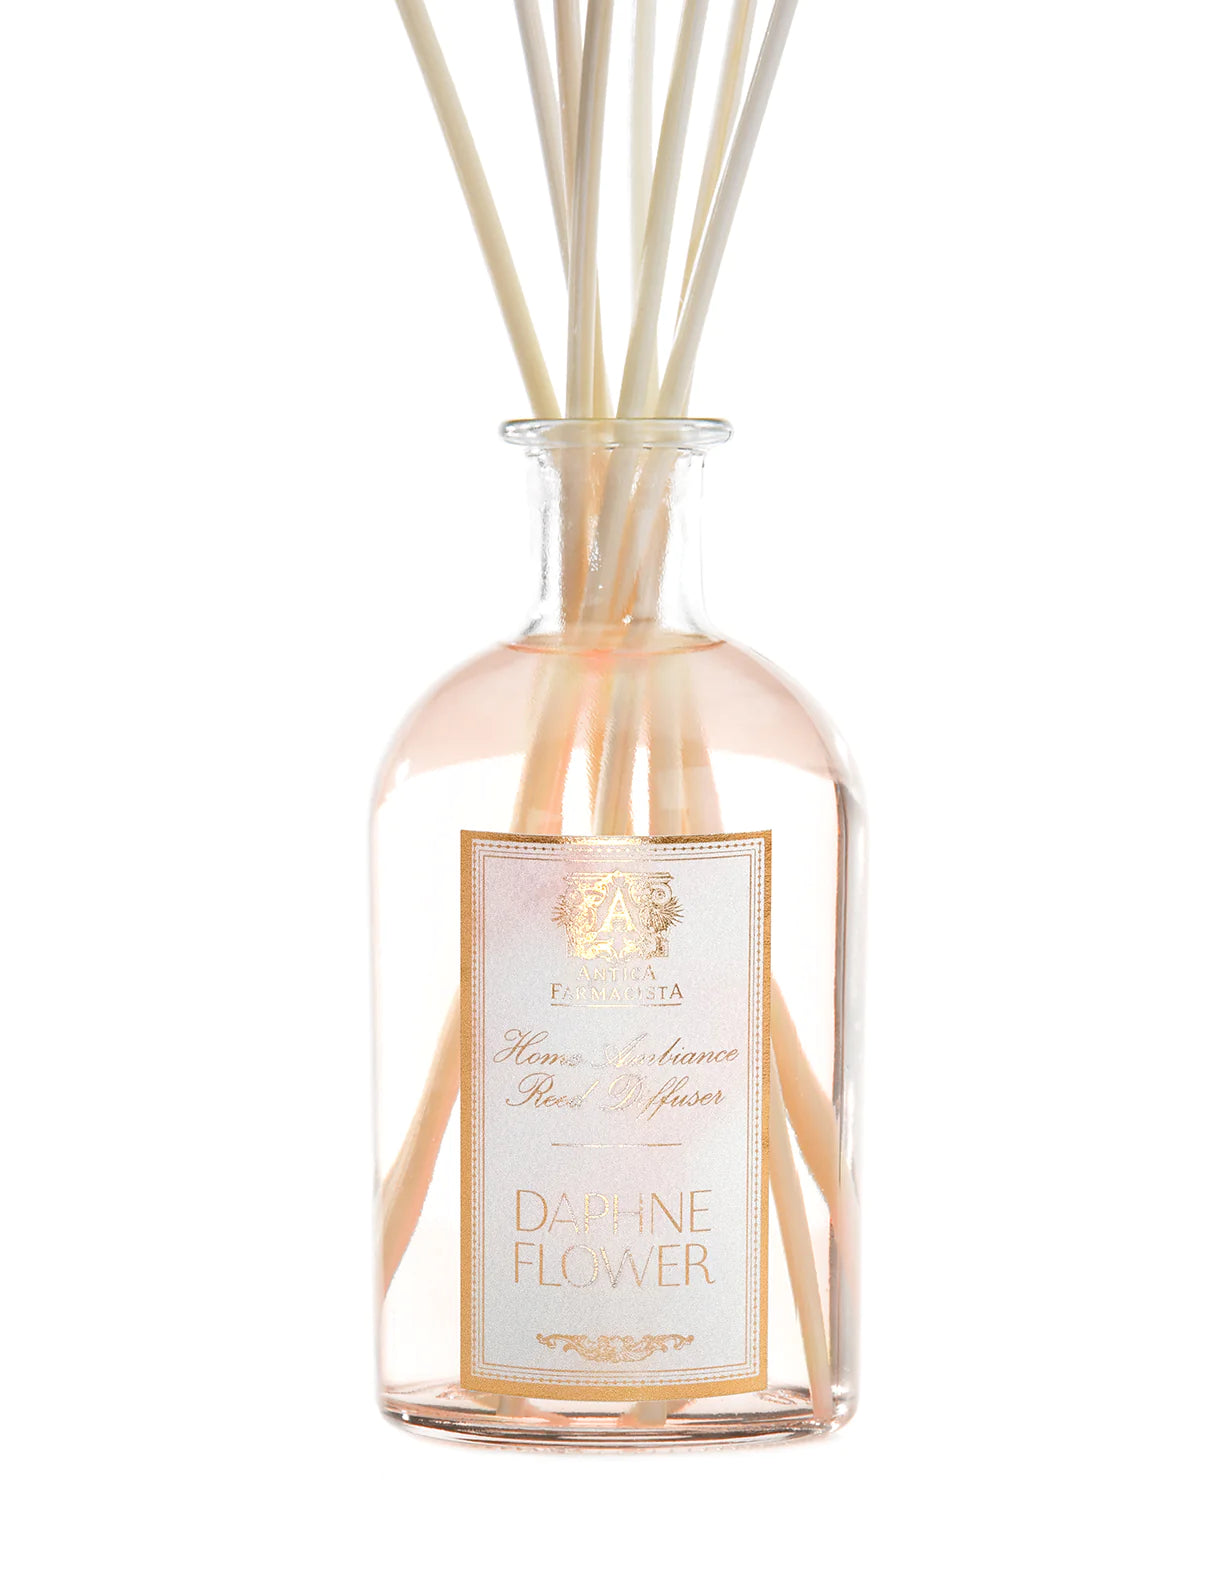 Daphne Flower Reed Diffuser